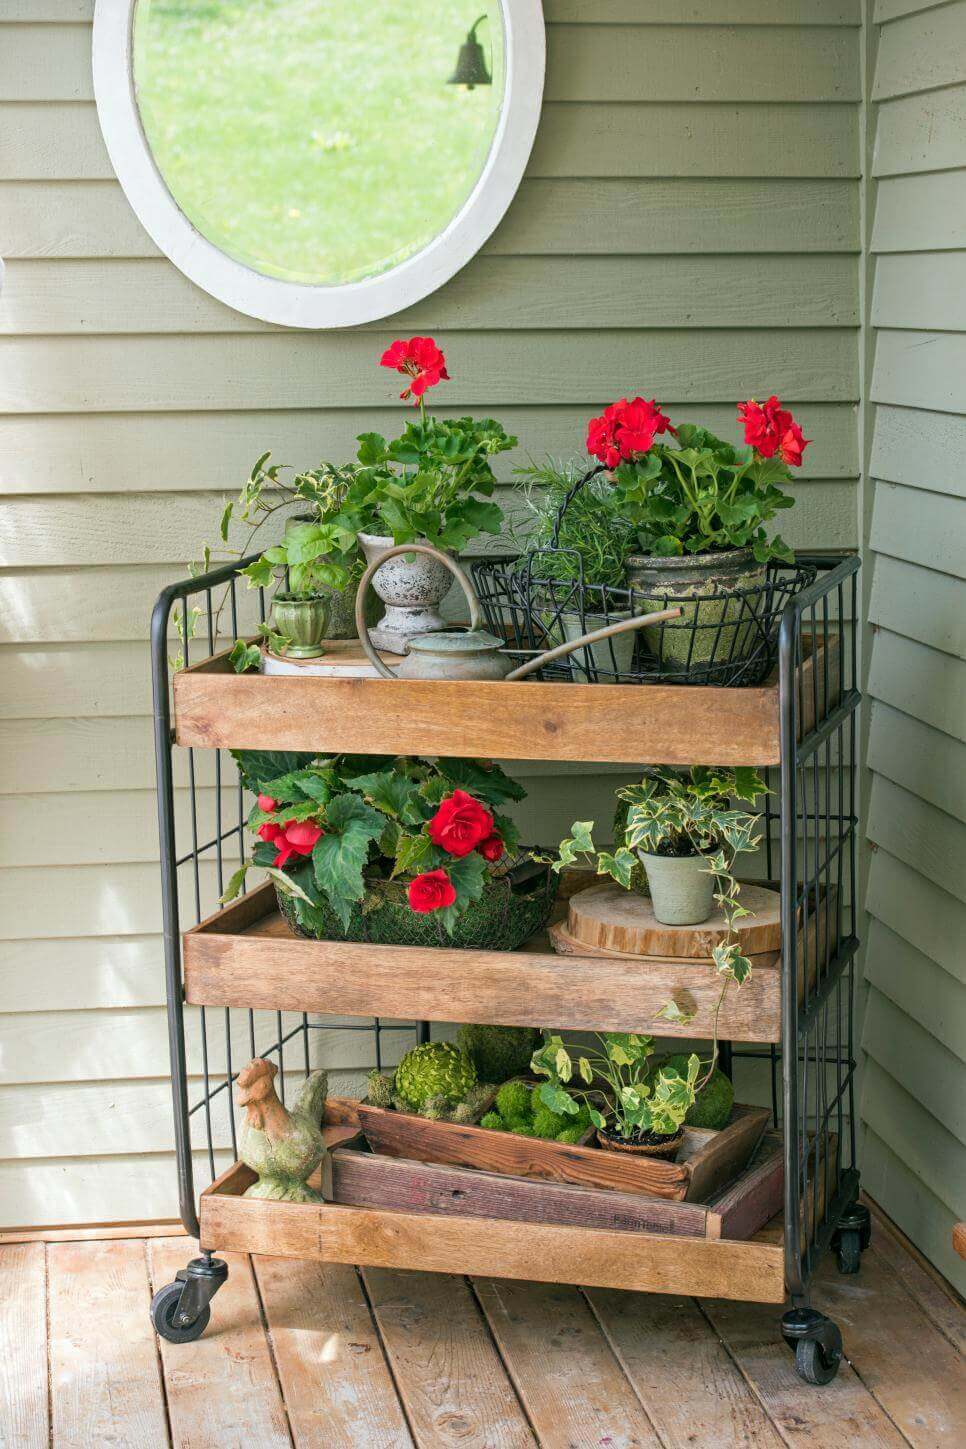 Trolley Gardening Display - small front porch decor ideas